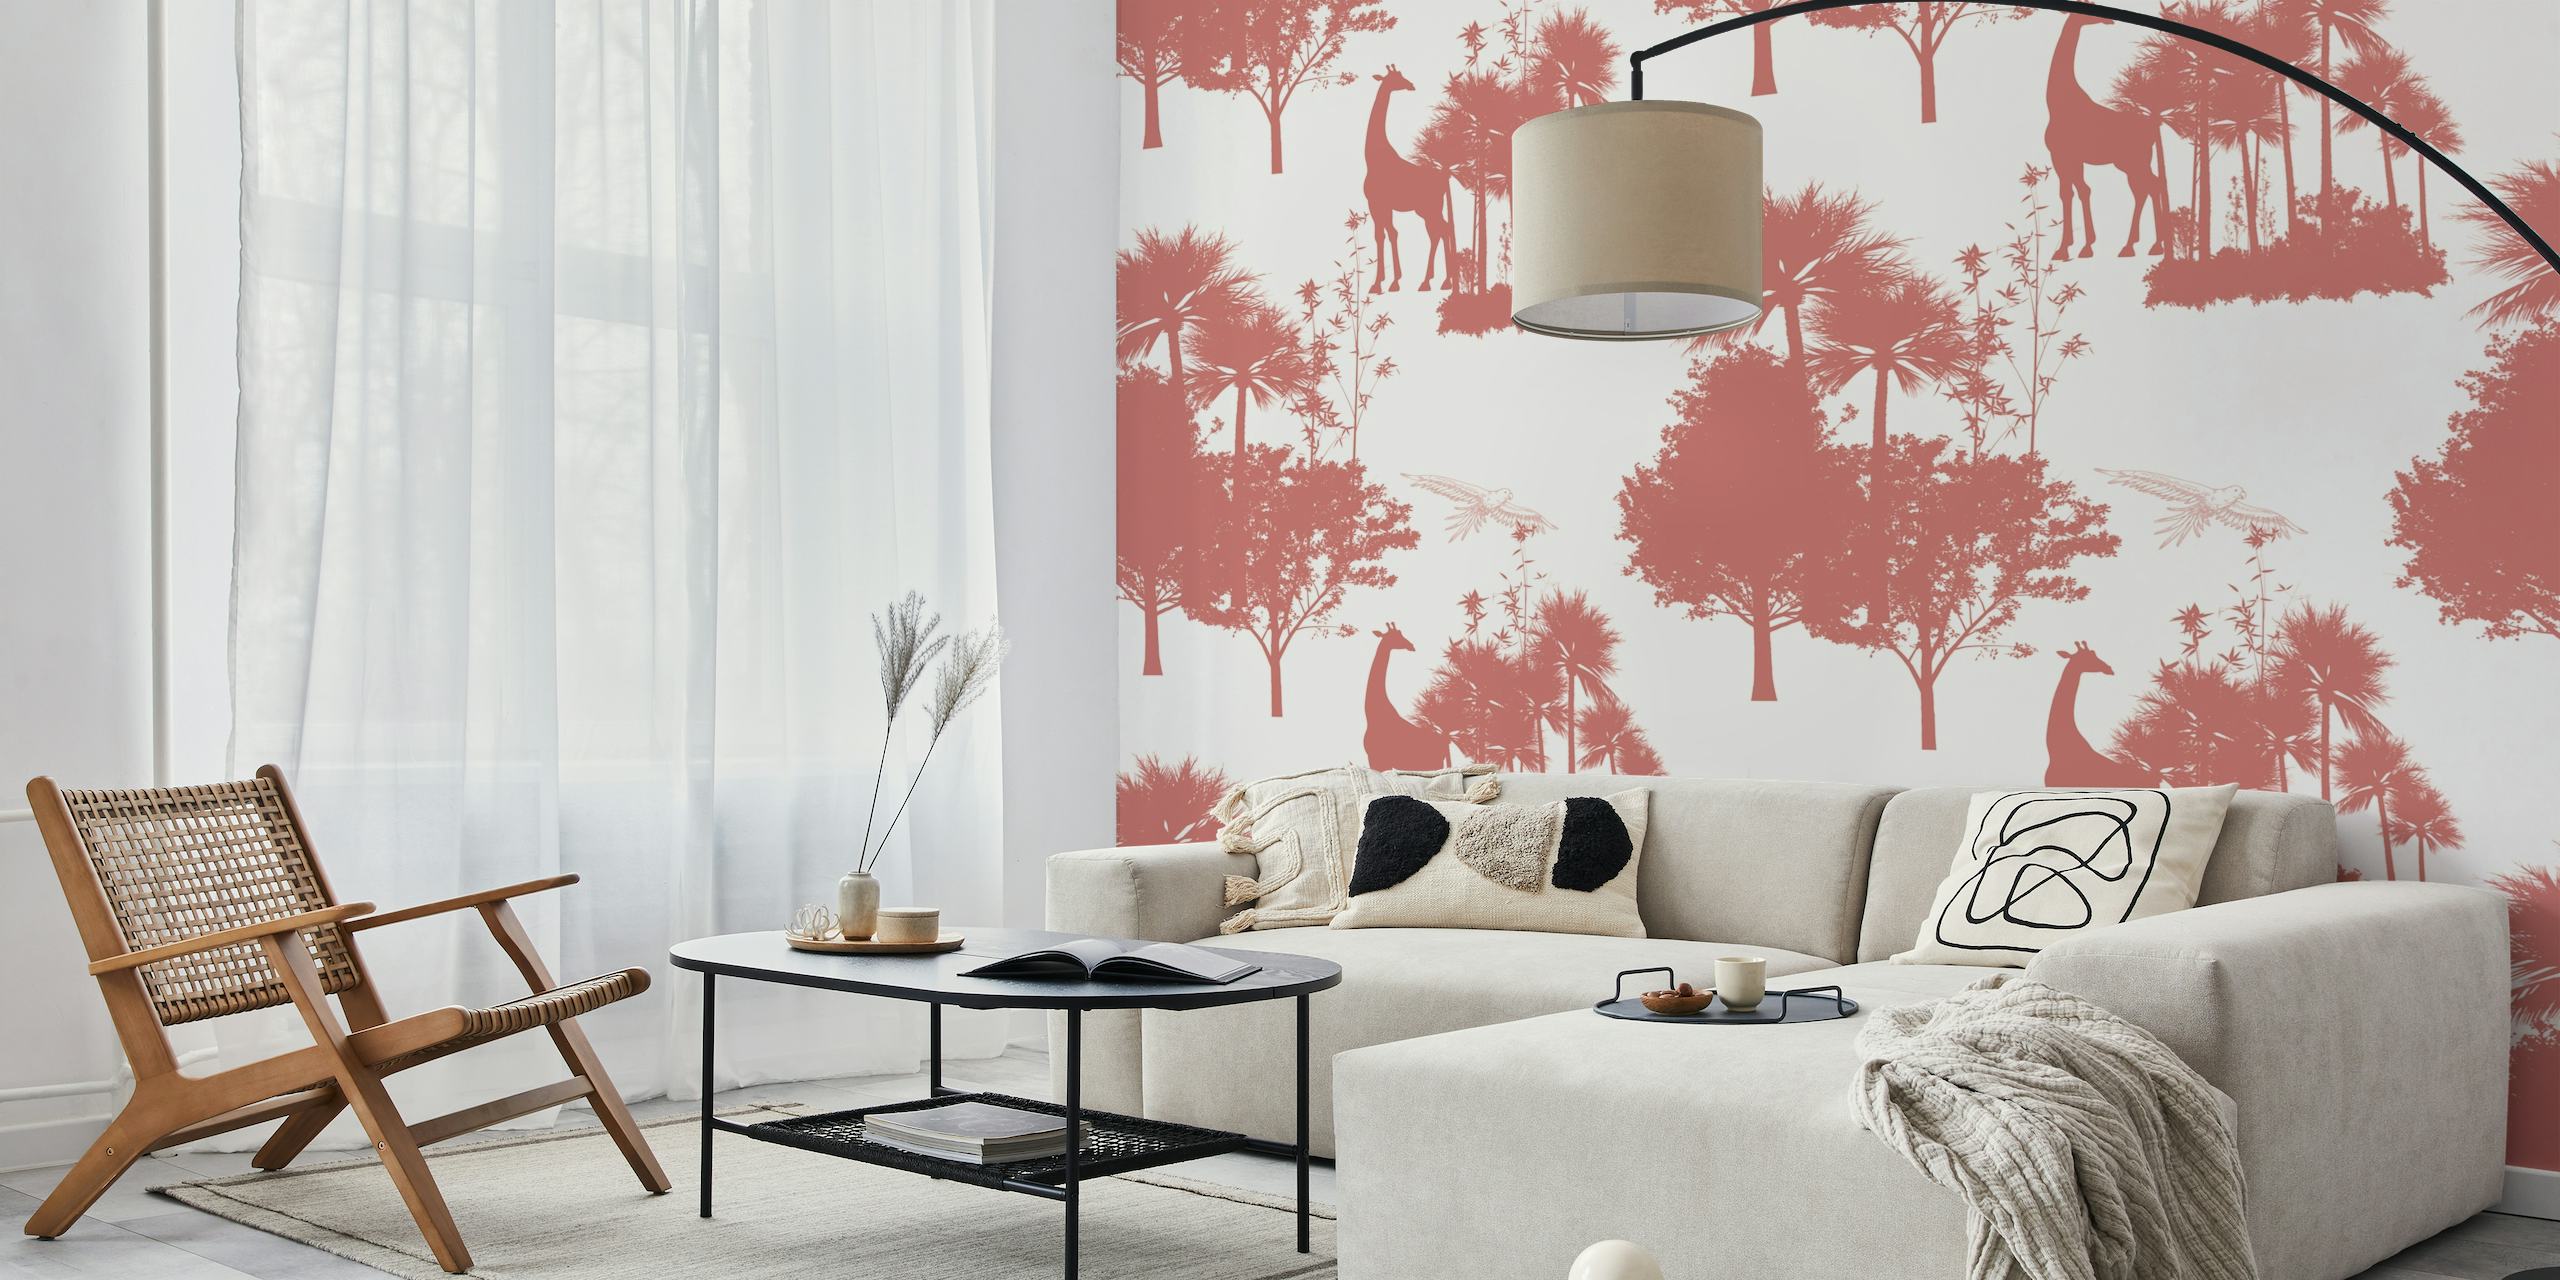 Red Safari Toile Pattern wall mural with giraffes and palm trees